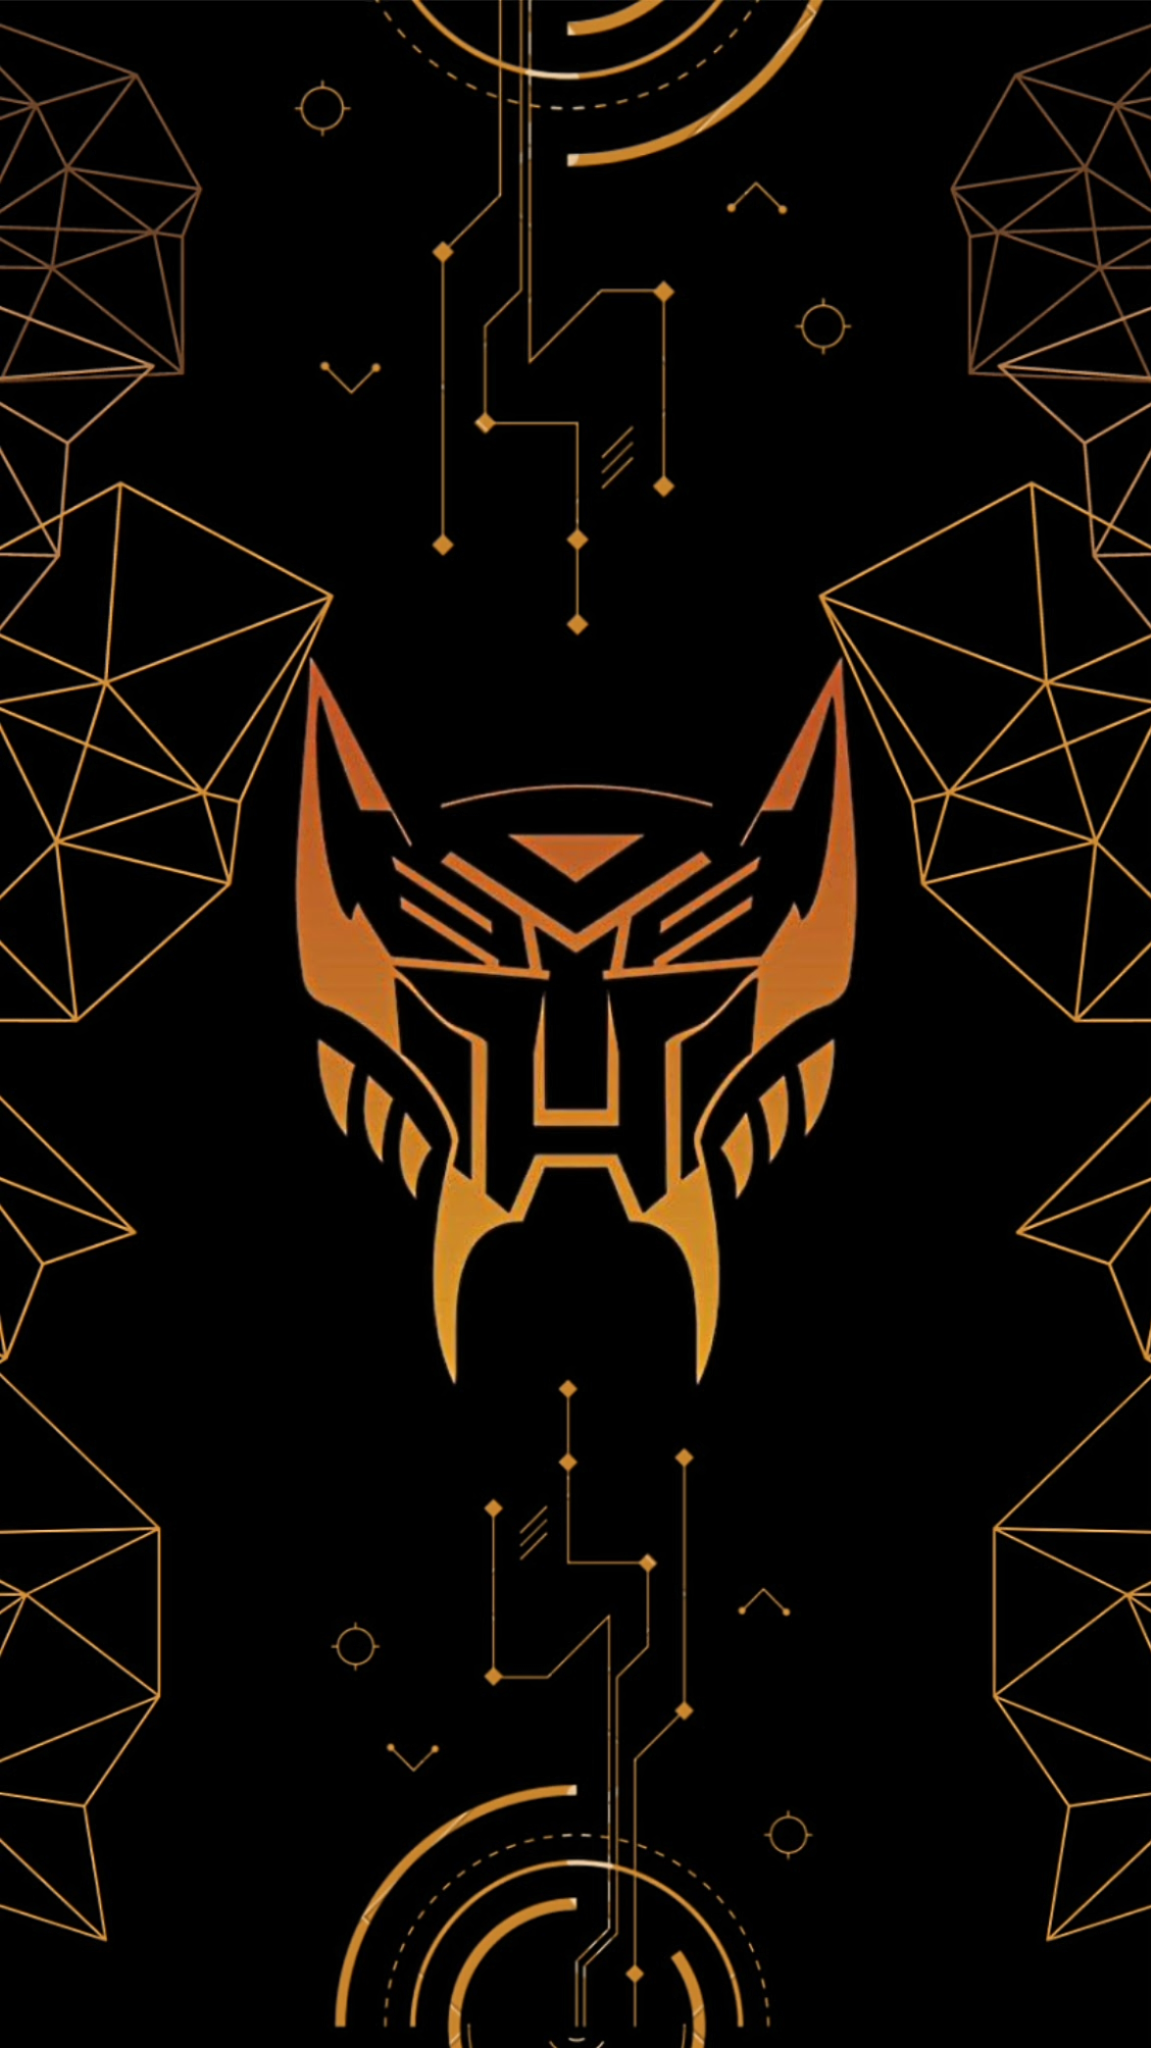 Transformers inspired phone wallpapers more wallpapers and variations are on the way info in the ments rtransformers